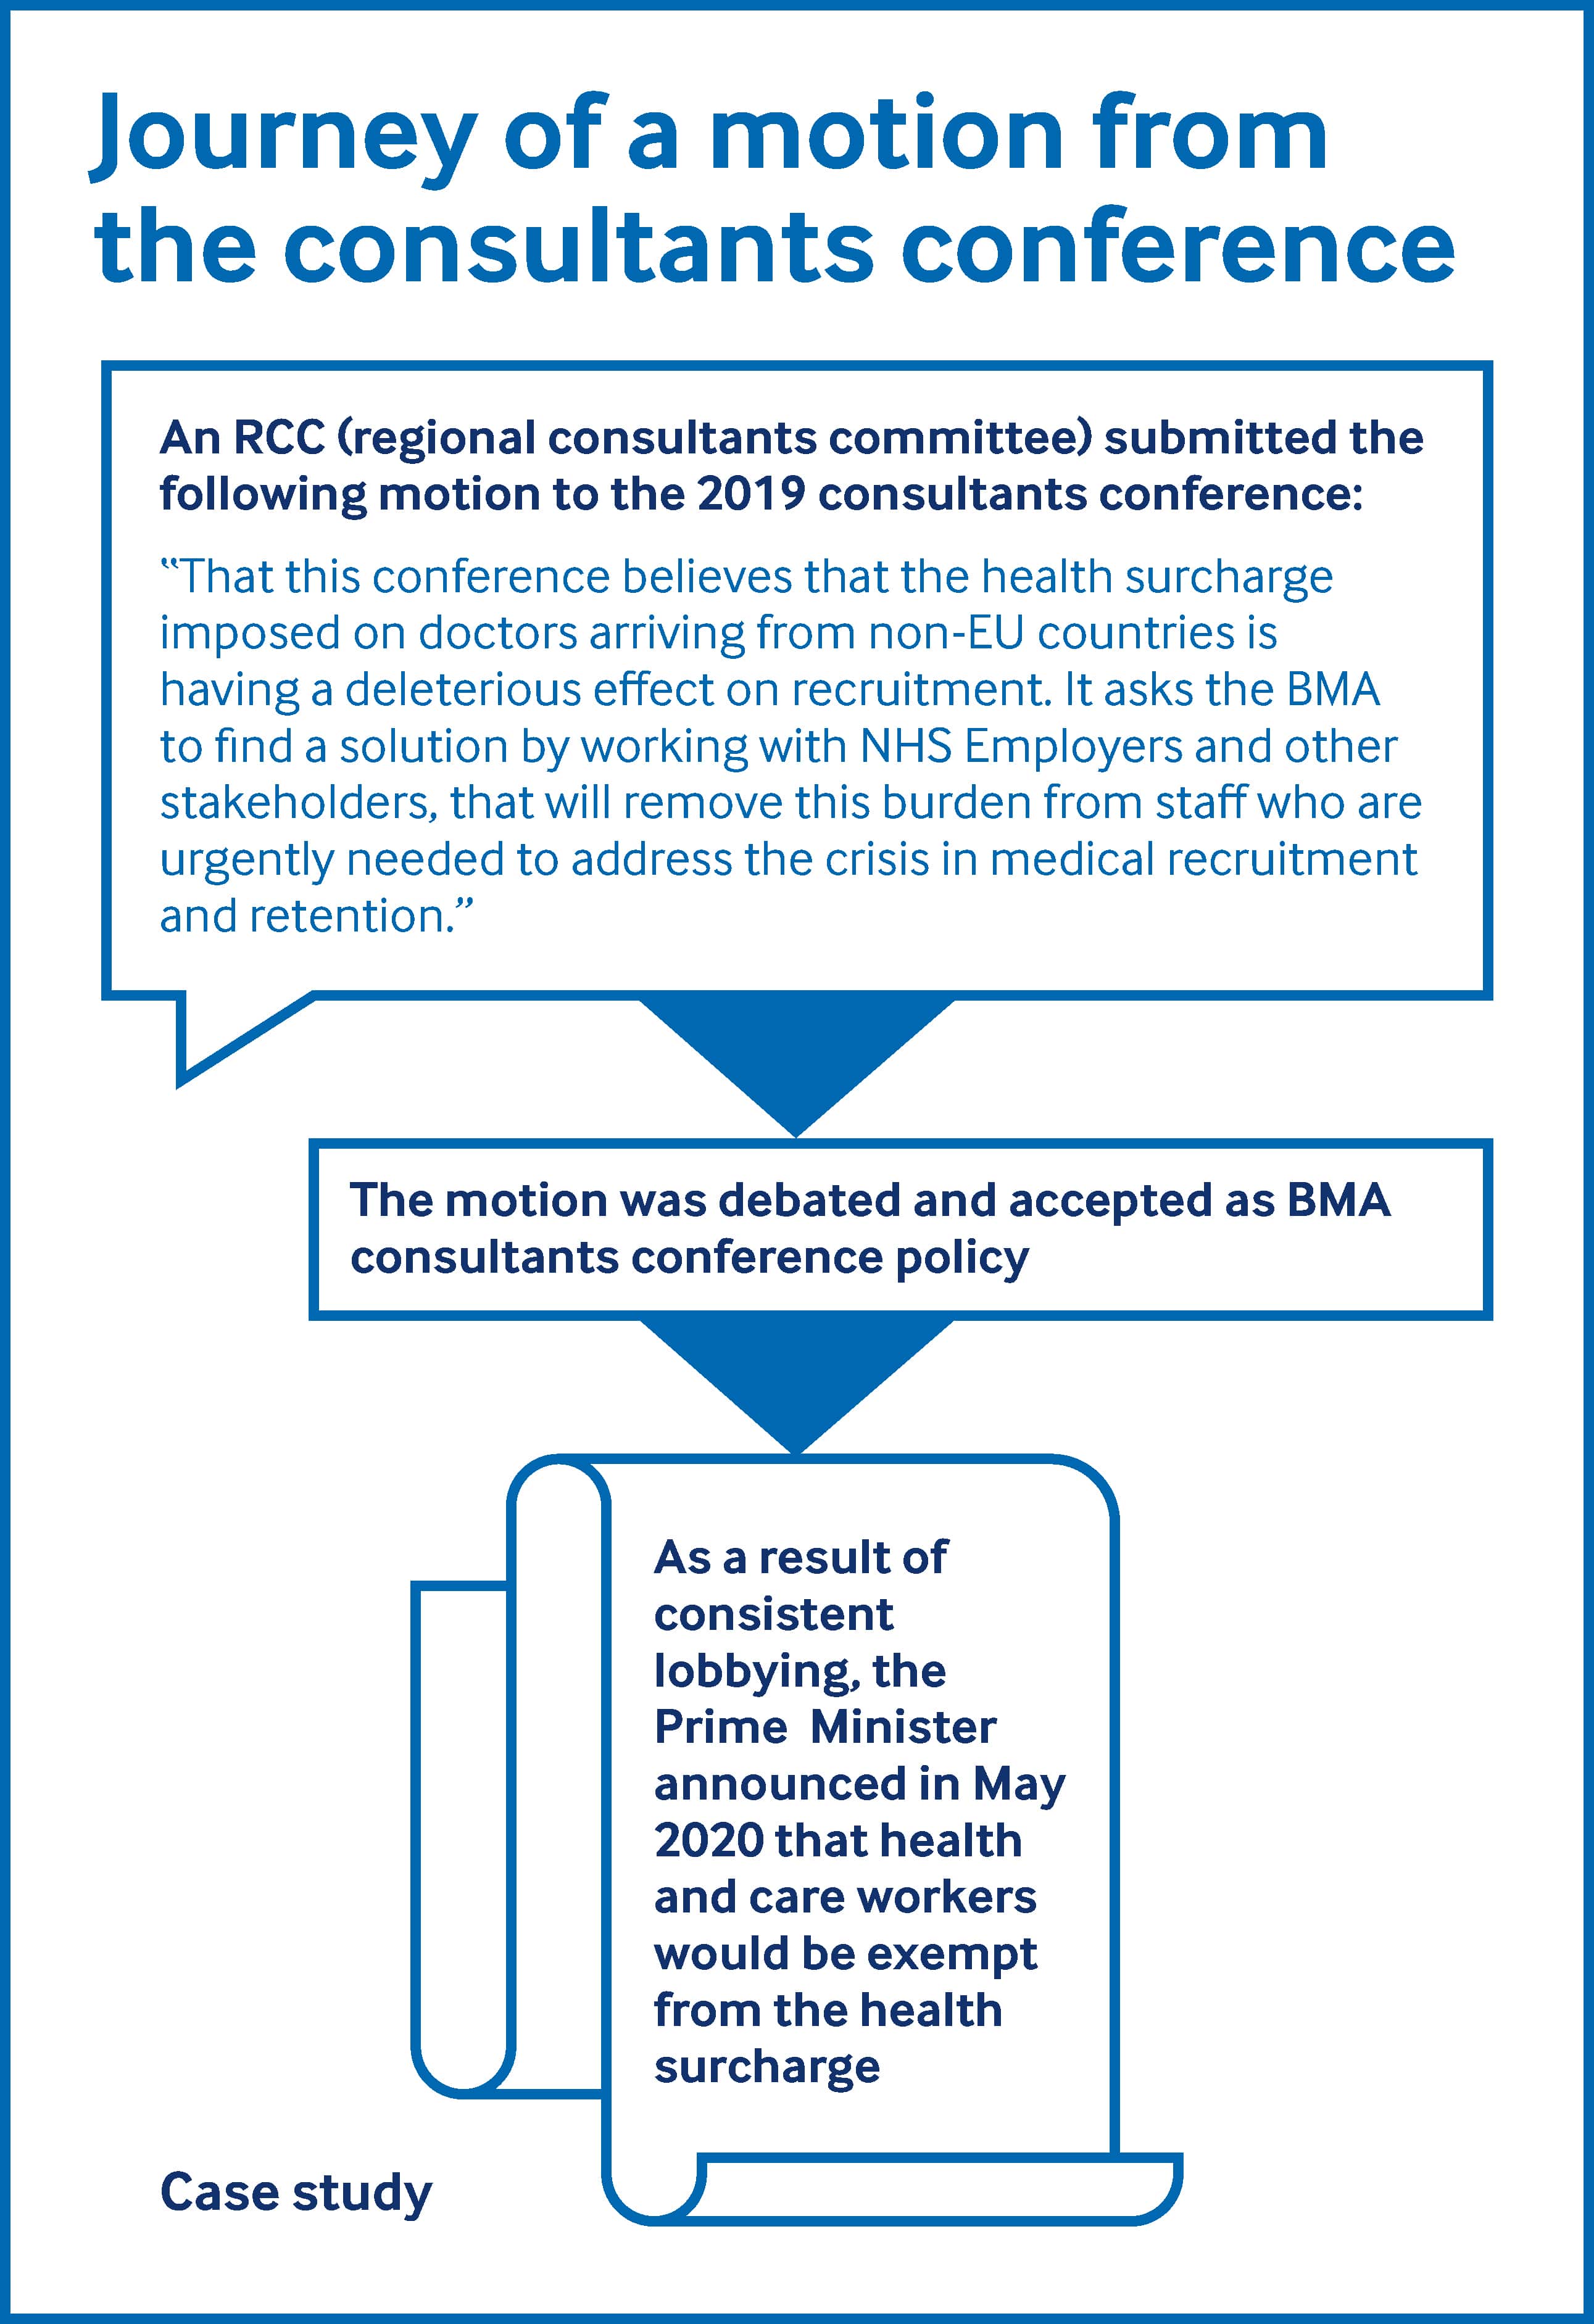 Journey of a motion from the consultants conference: a regional consultants committee submitted a motion in 2019 on the health surcharge imposed on doctors from non-EU countries. It was debated at conference and became policy, and in May 2020 our lobbying was successful